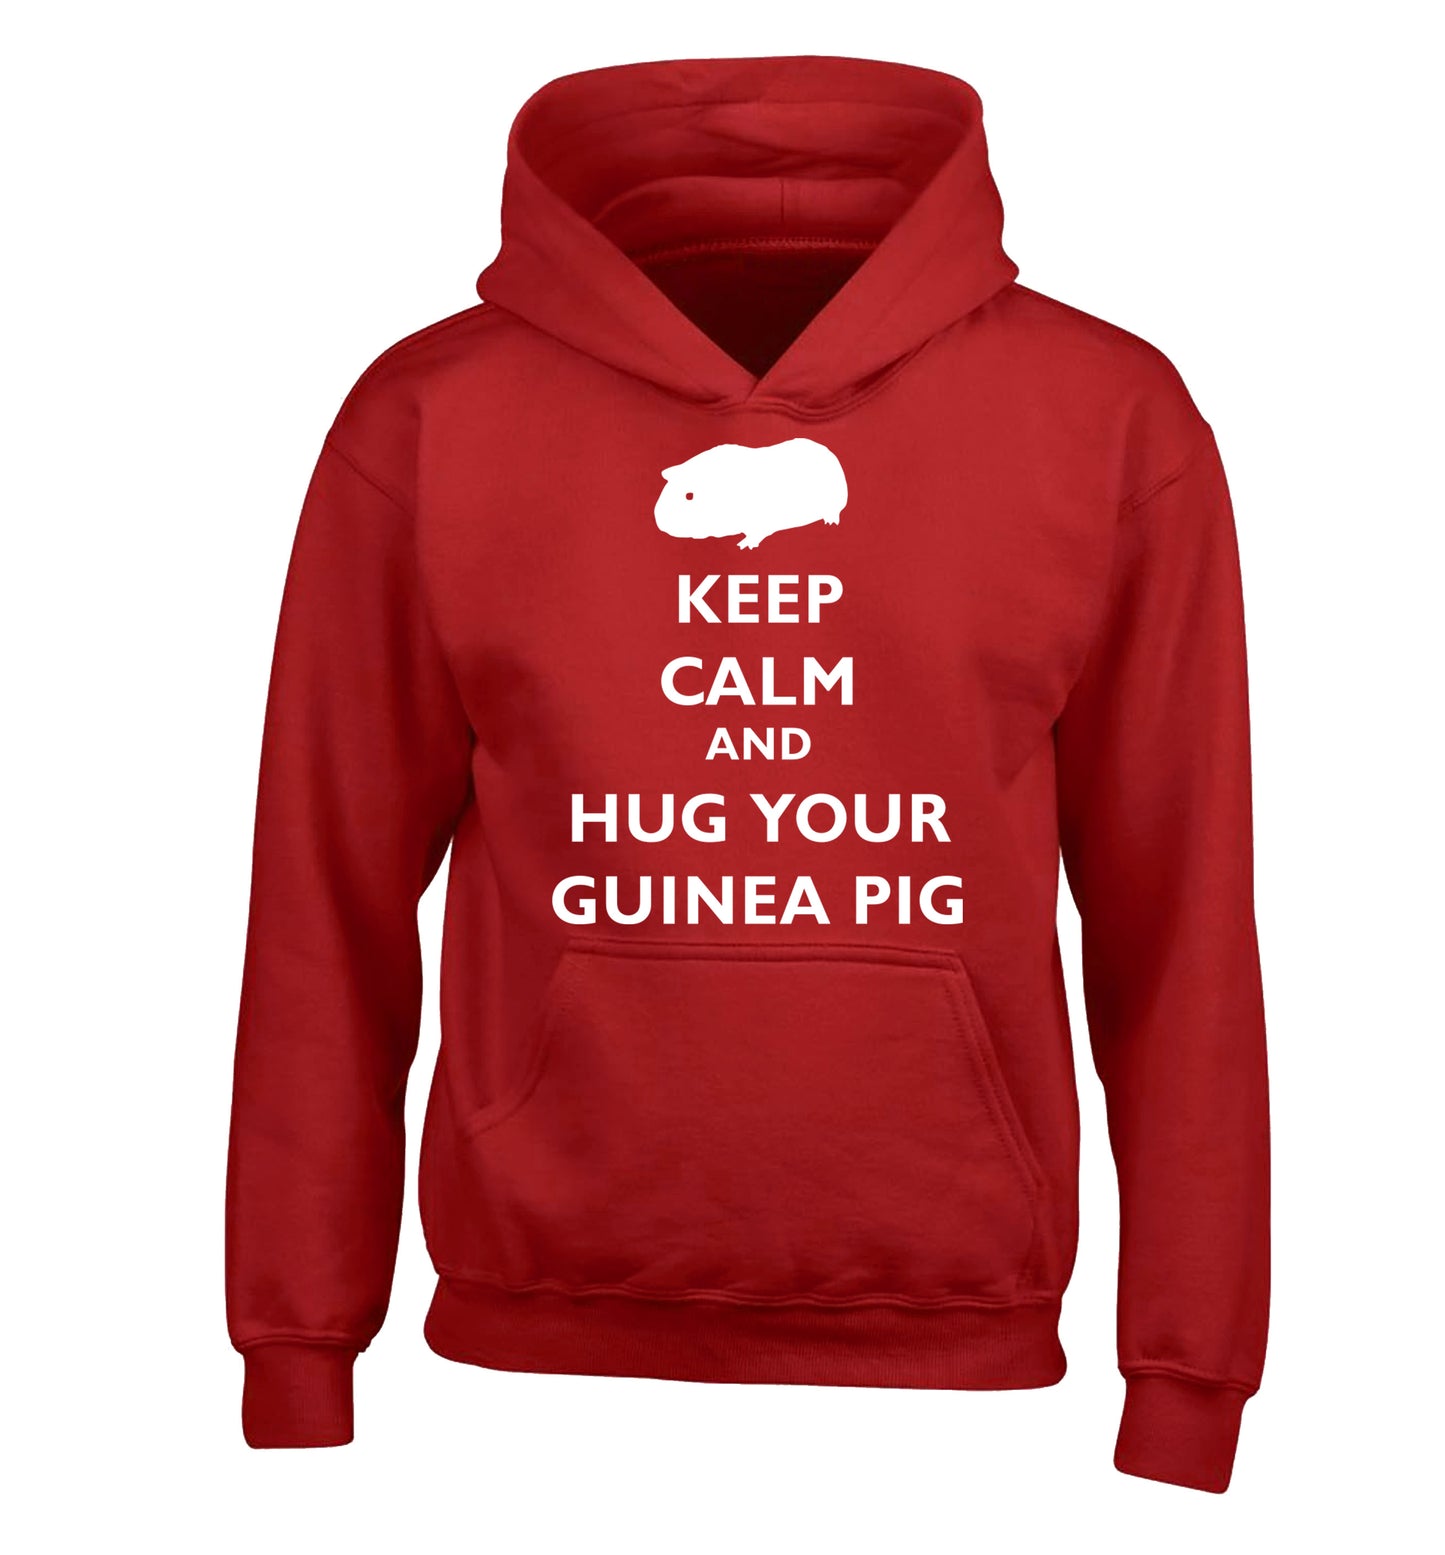 Keep calm and hug your guineapig children's red hoodie 12-13 Years